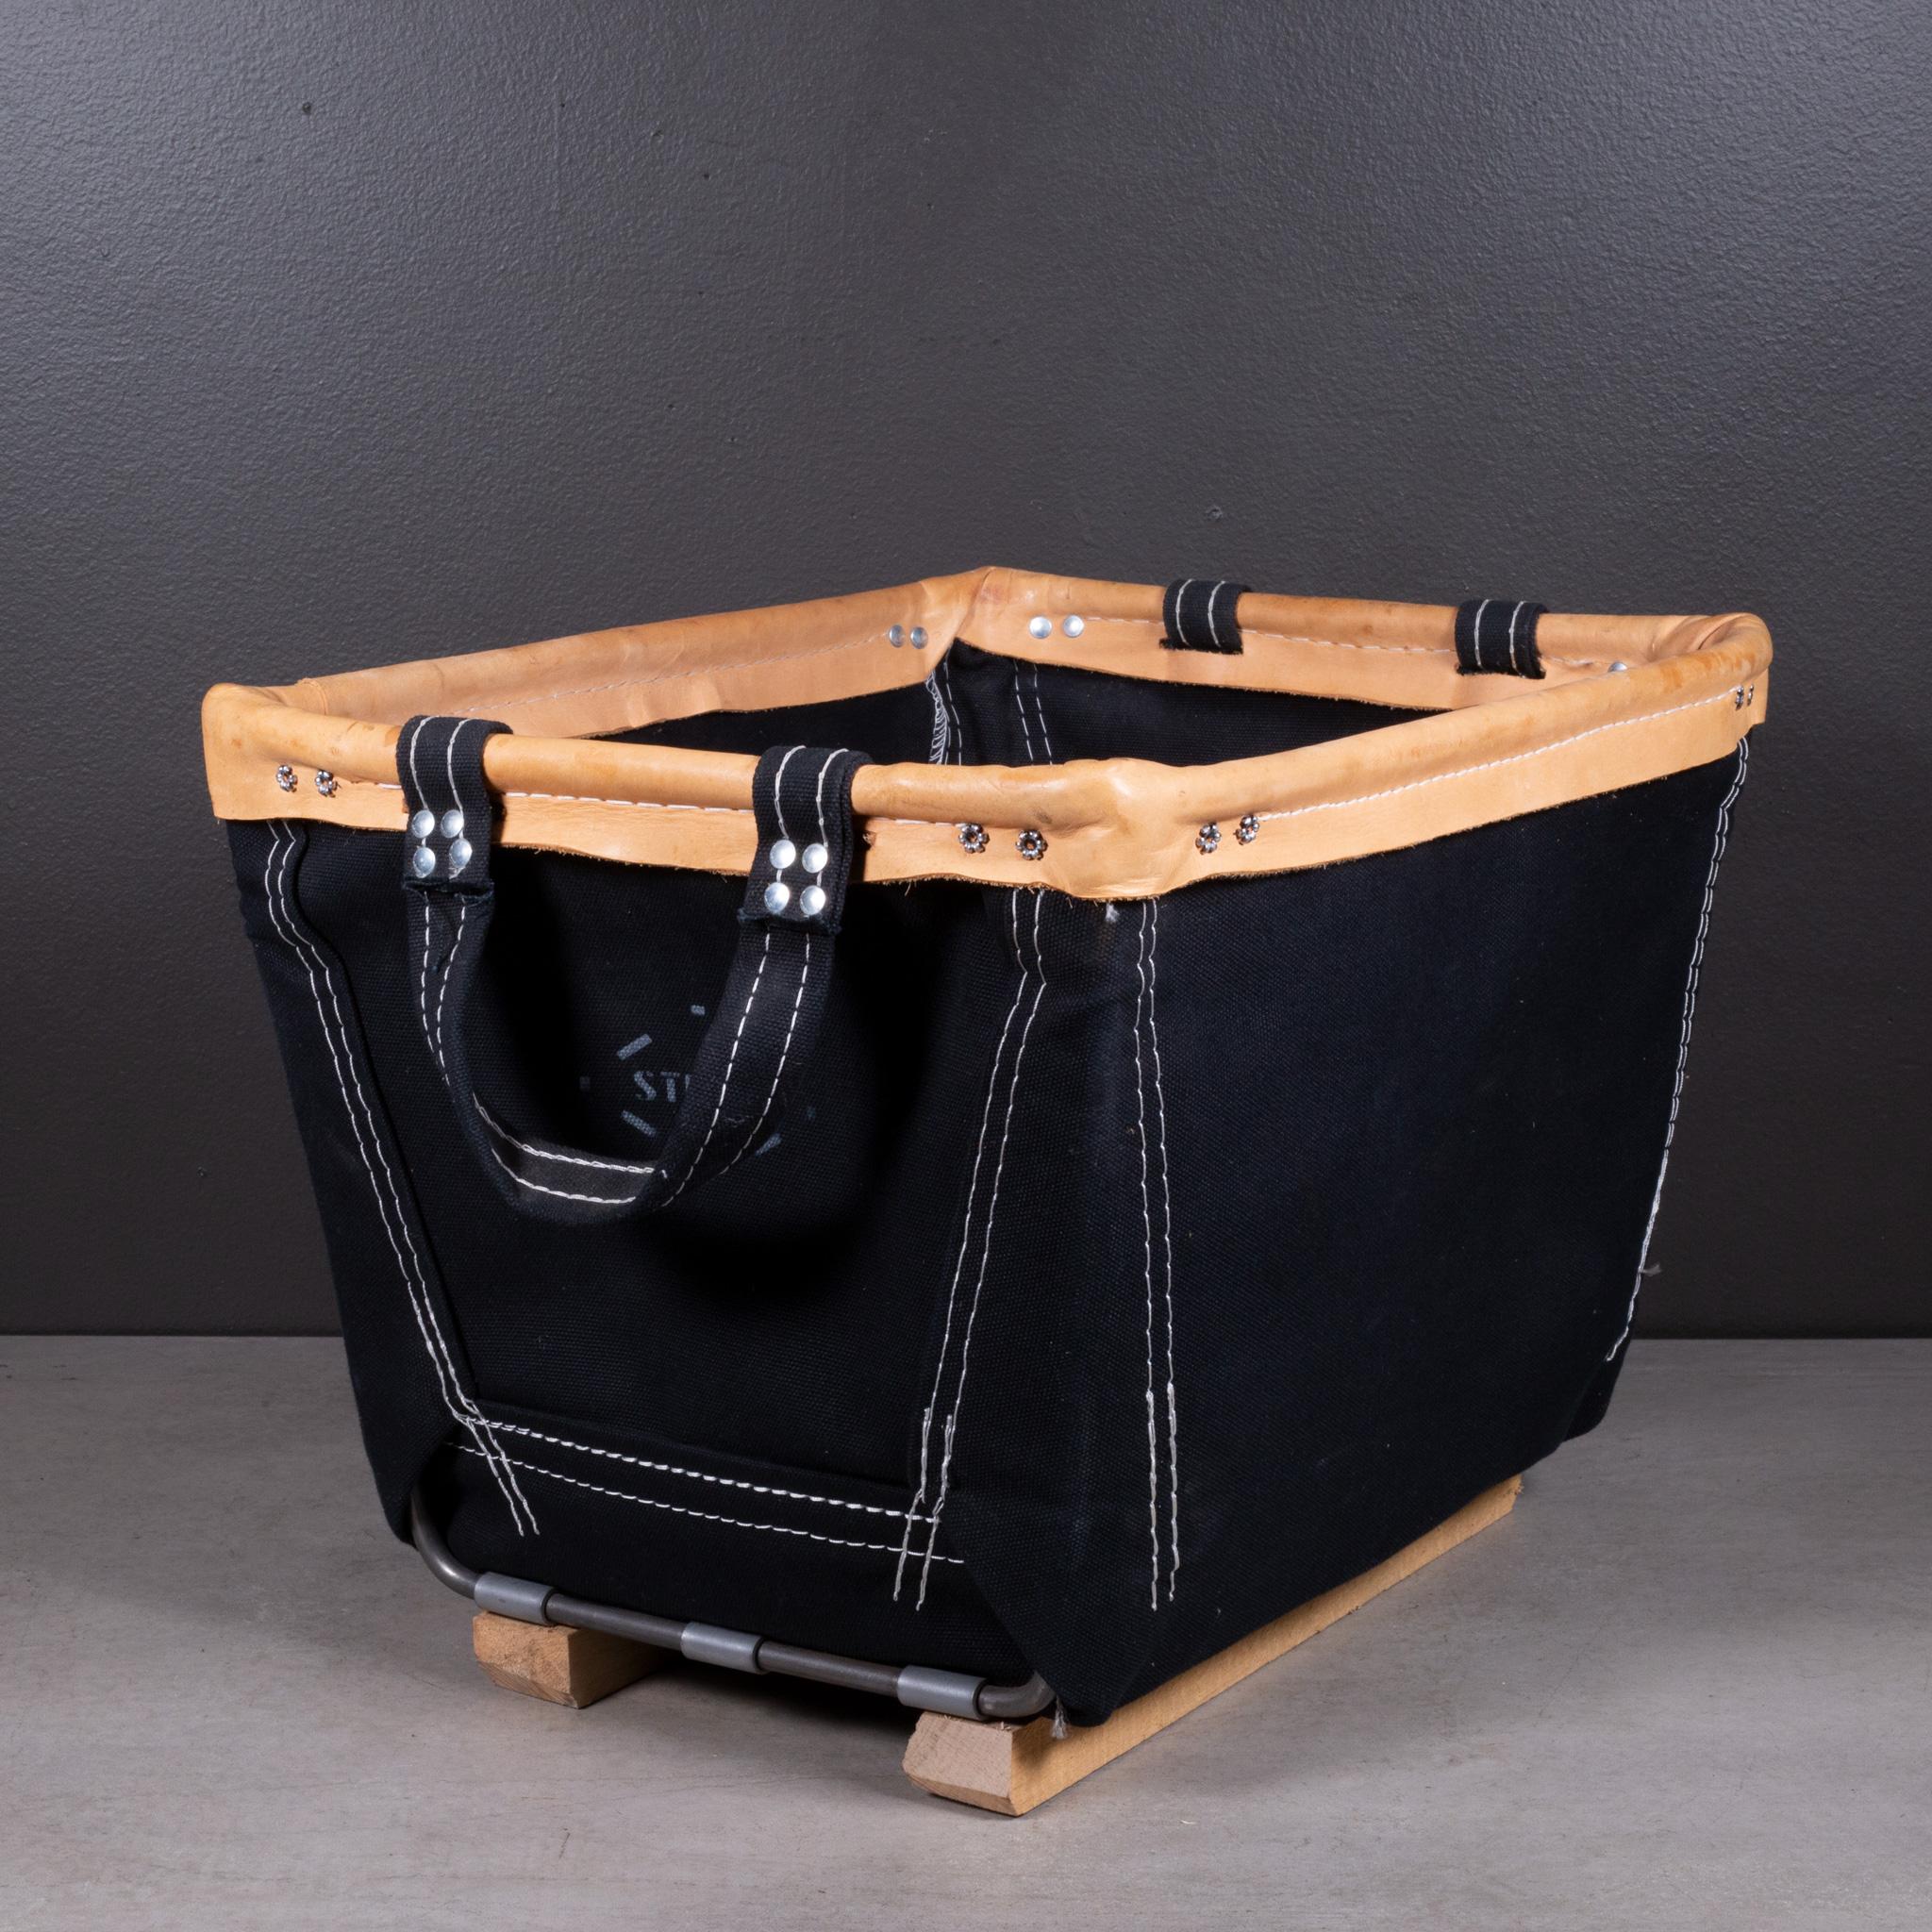 ABOUT

One available. 

Contact us for a more affordable shipping rate: S16 Home San Francisco. 

These baskets are the compact version of industrial carry baskets used on construction sites and factory floors. Each is made by hand in the US, with a